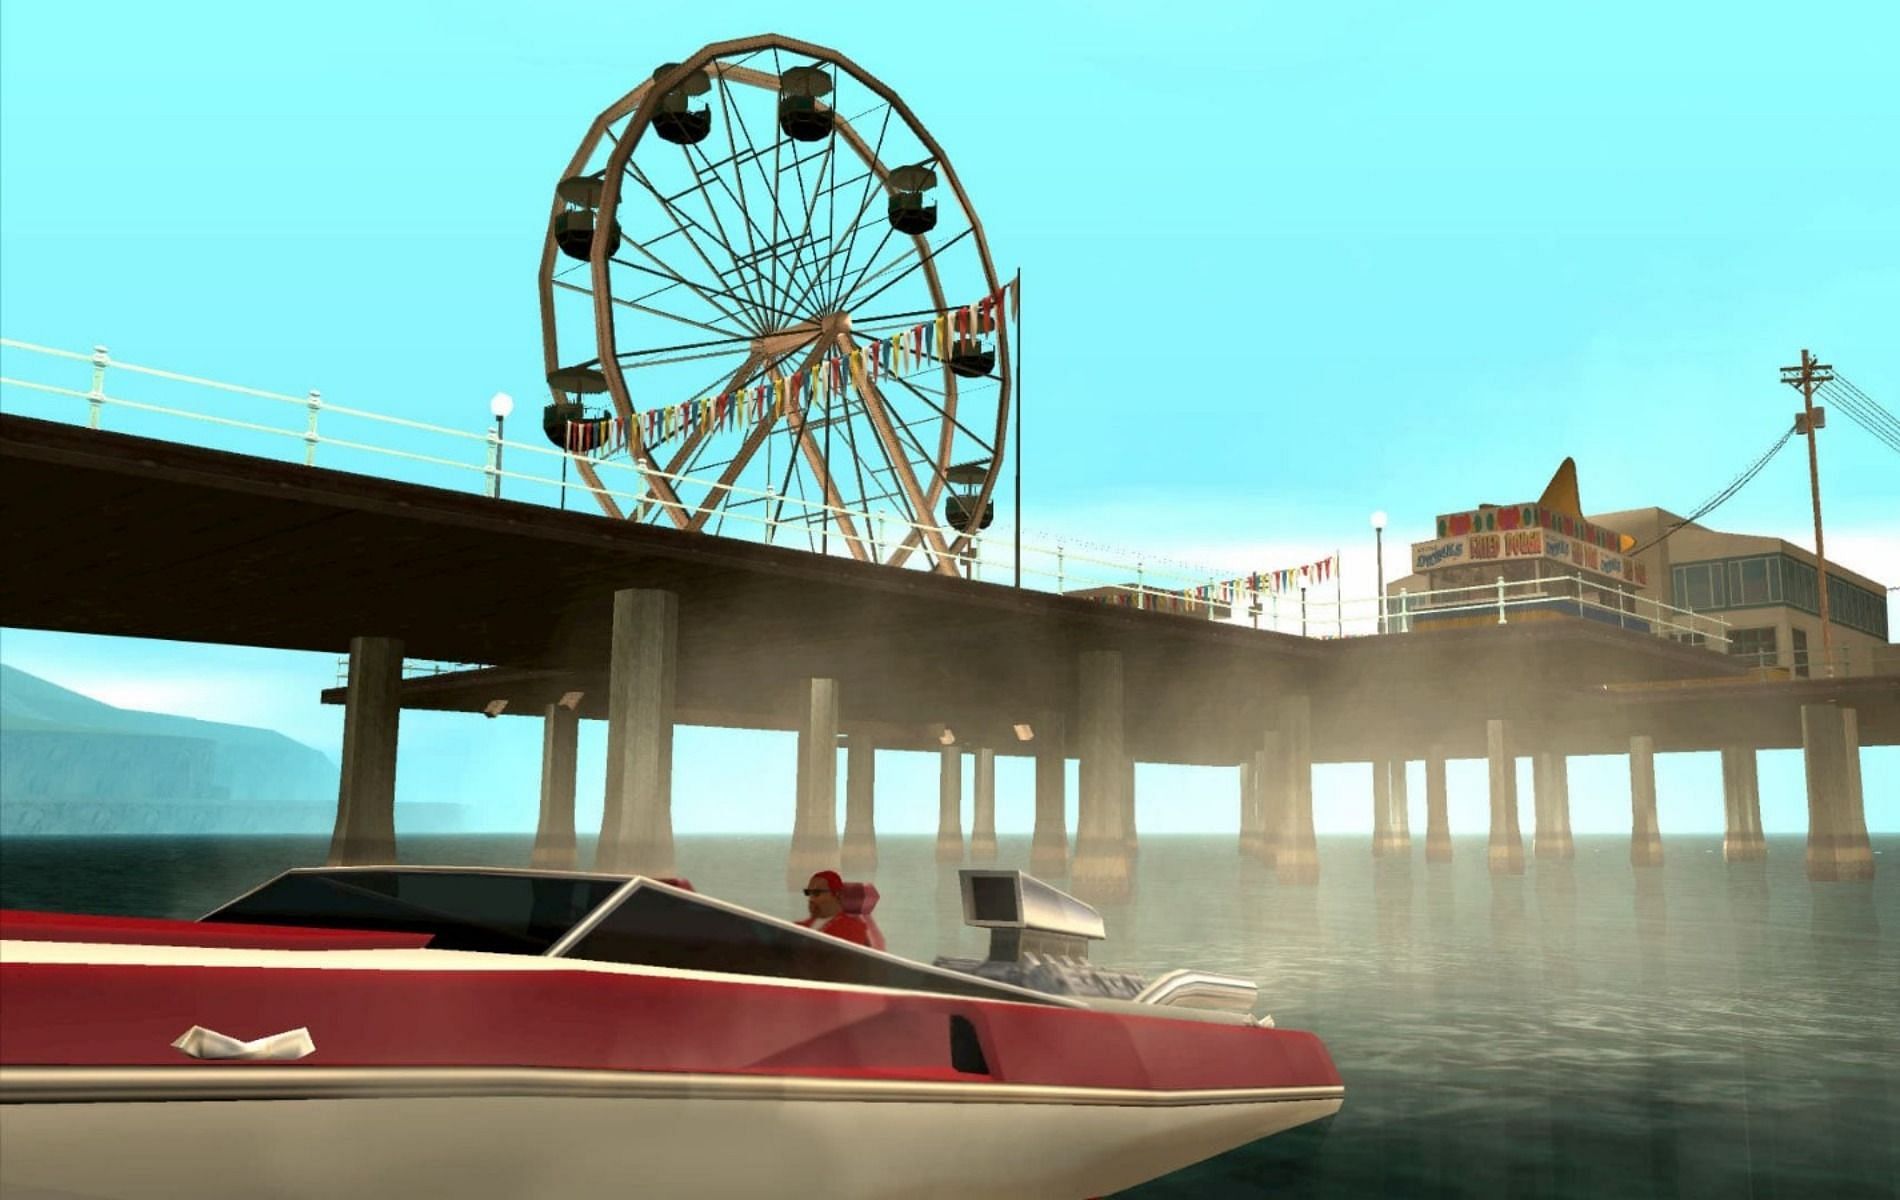 GTA San Andreas offers the best selection of cheats in the series (Image via Rockstar Games)